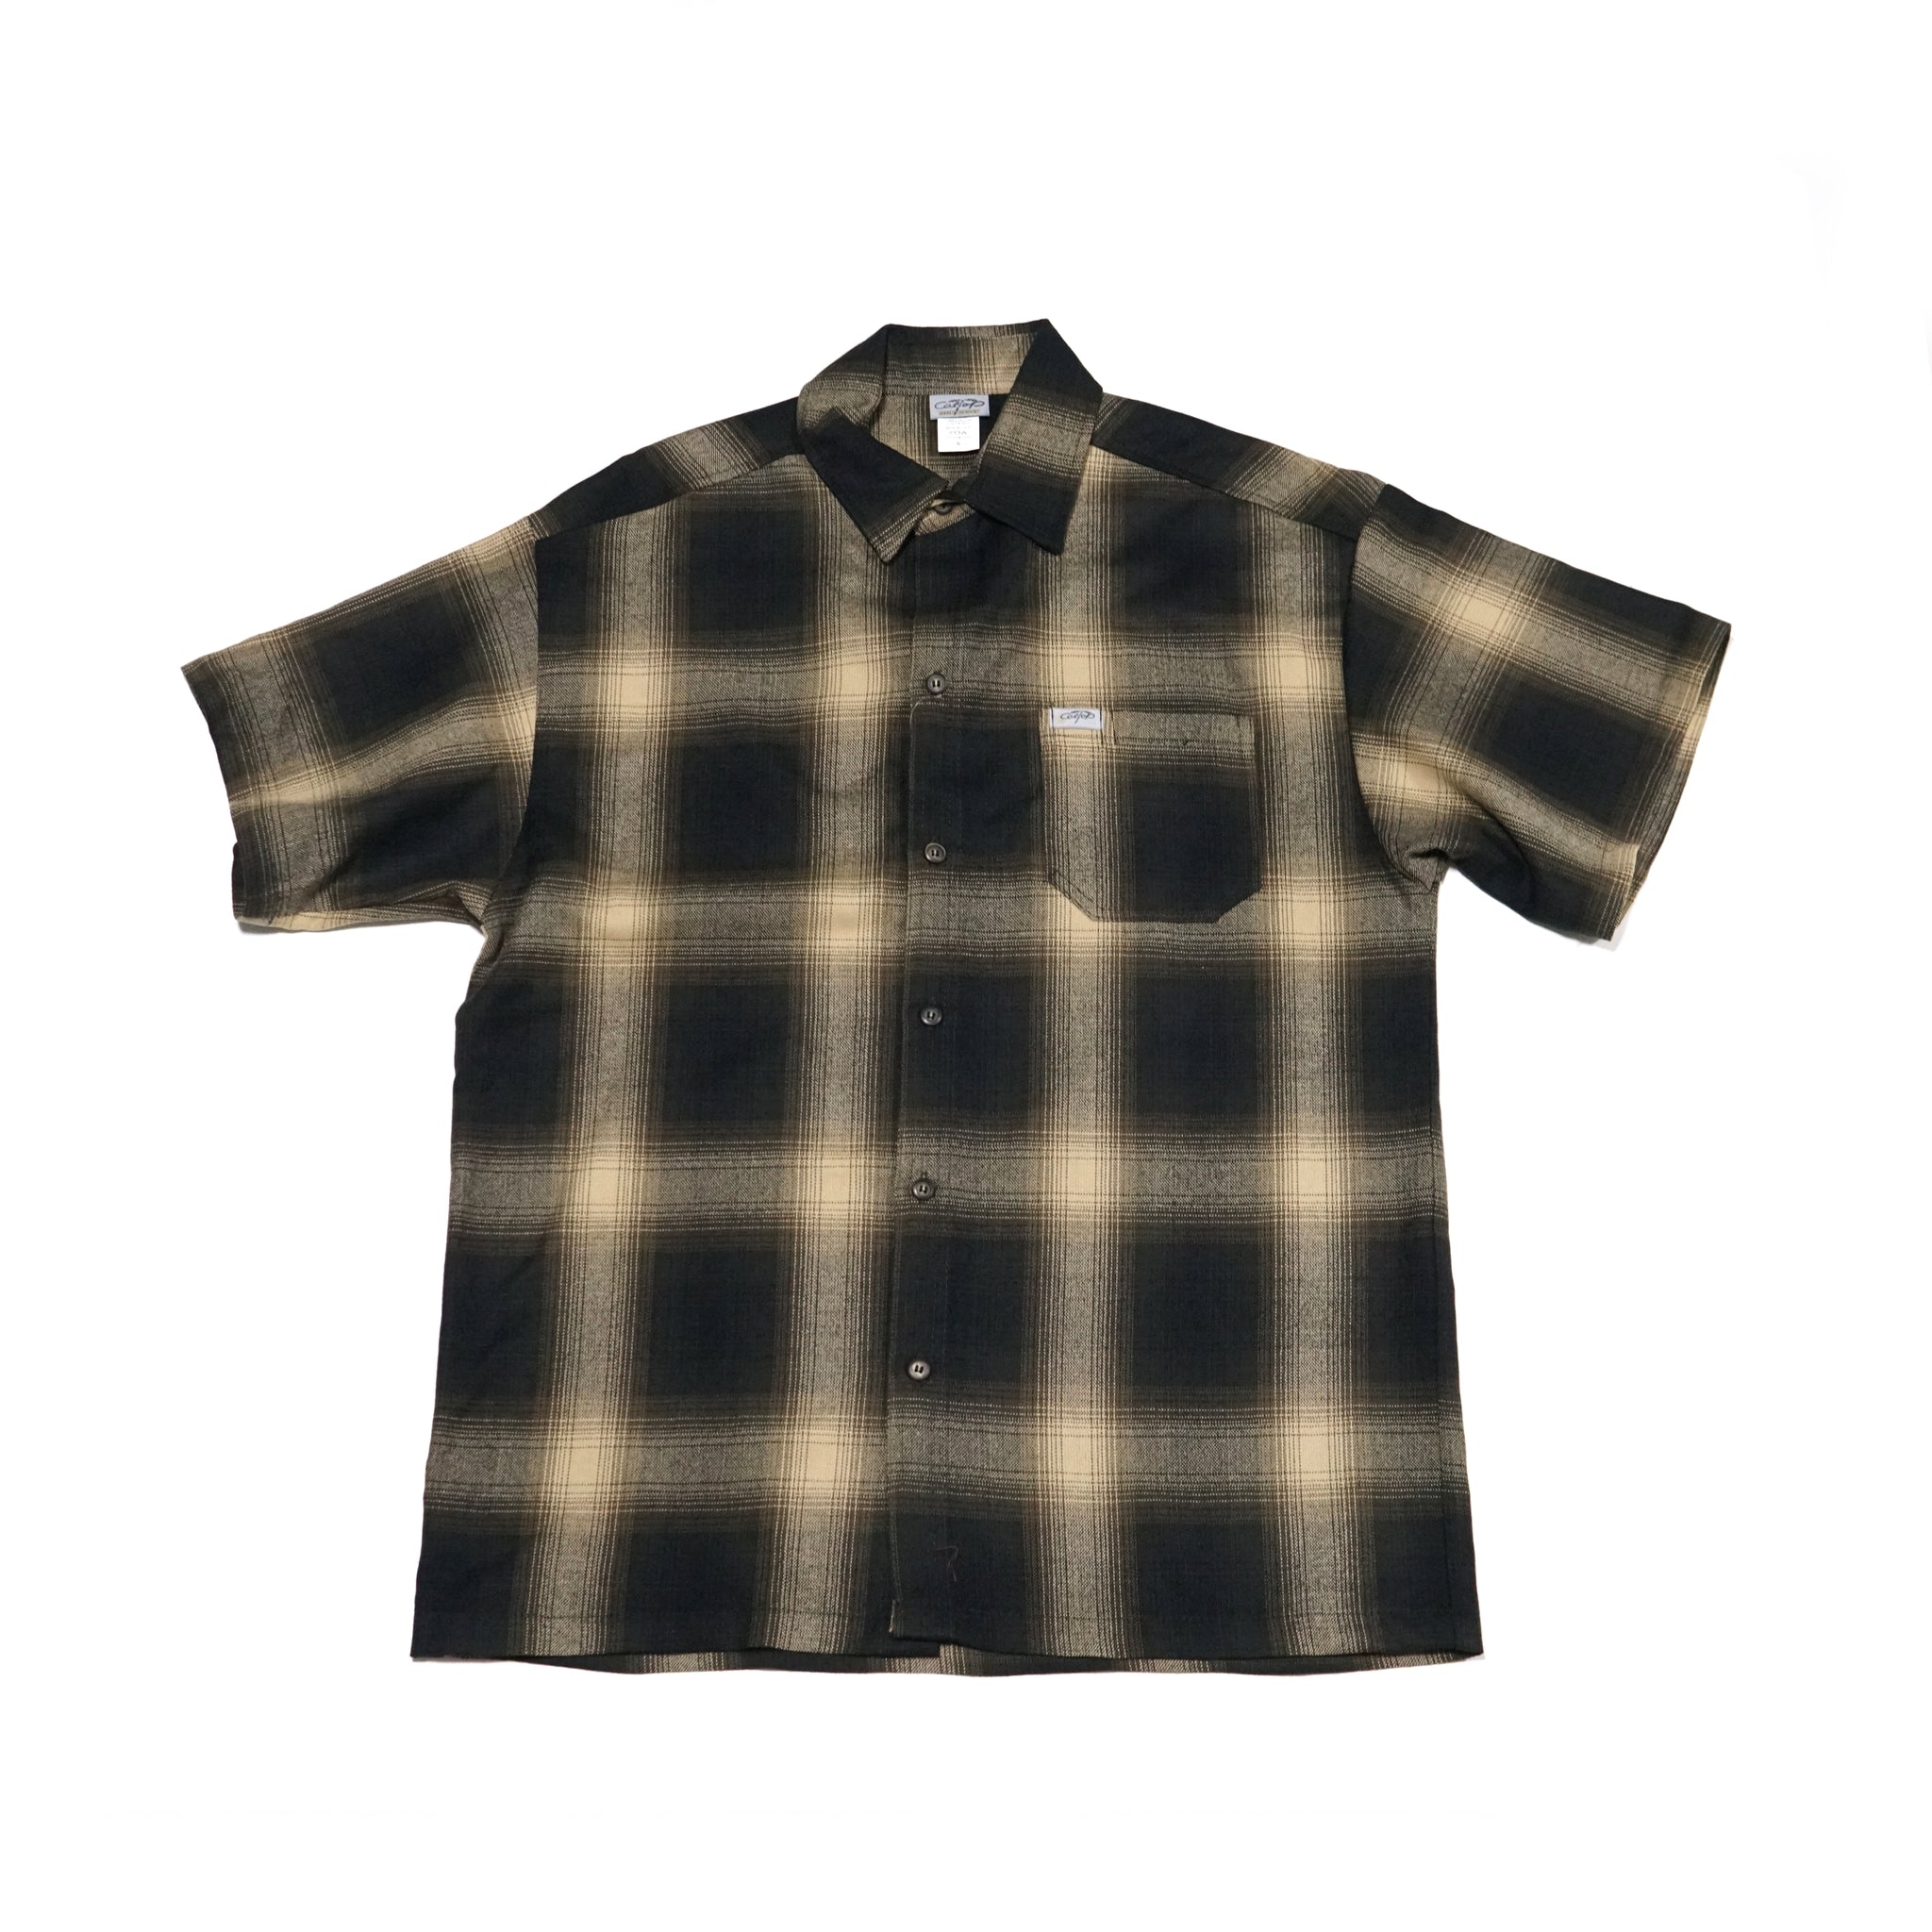 No:art-2000ss | Name:Ombrecheck ss | Color:Black/Ivory / Brown/Khaki / Green/White | Size:S/M/L【CALTOP_カルトップ】